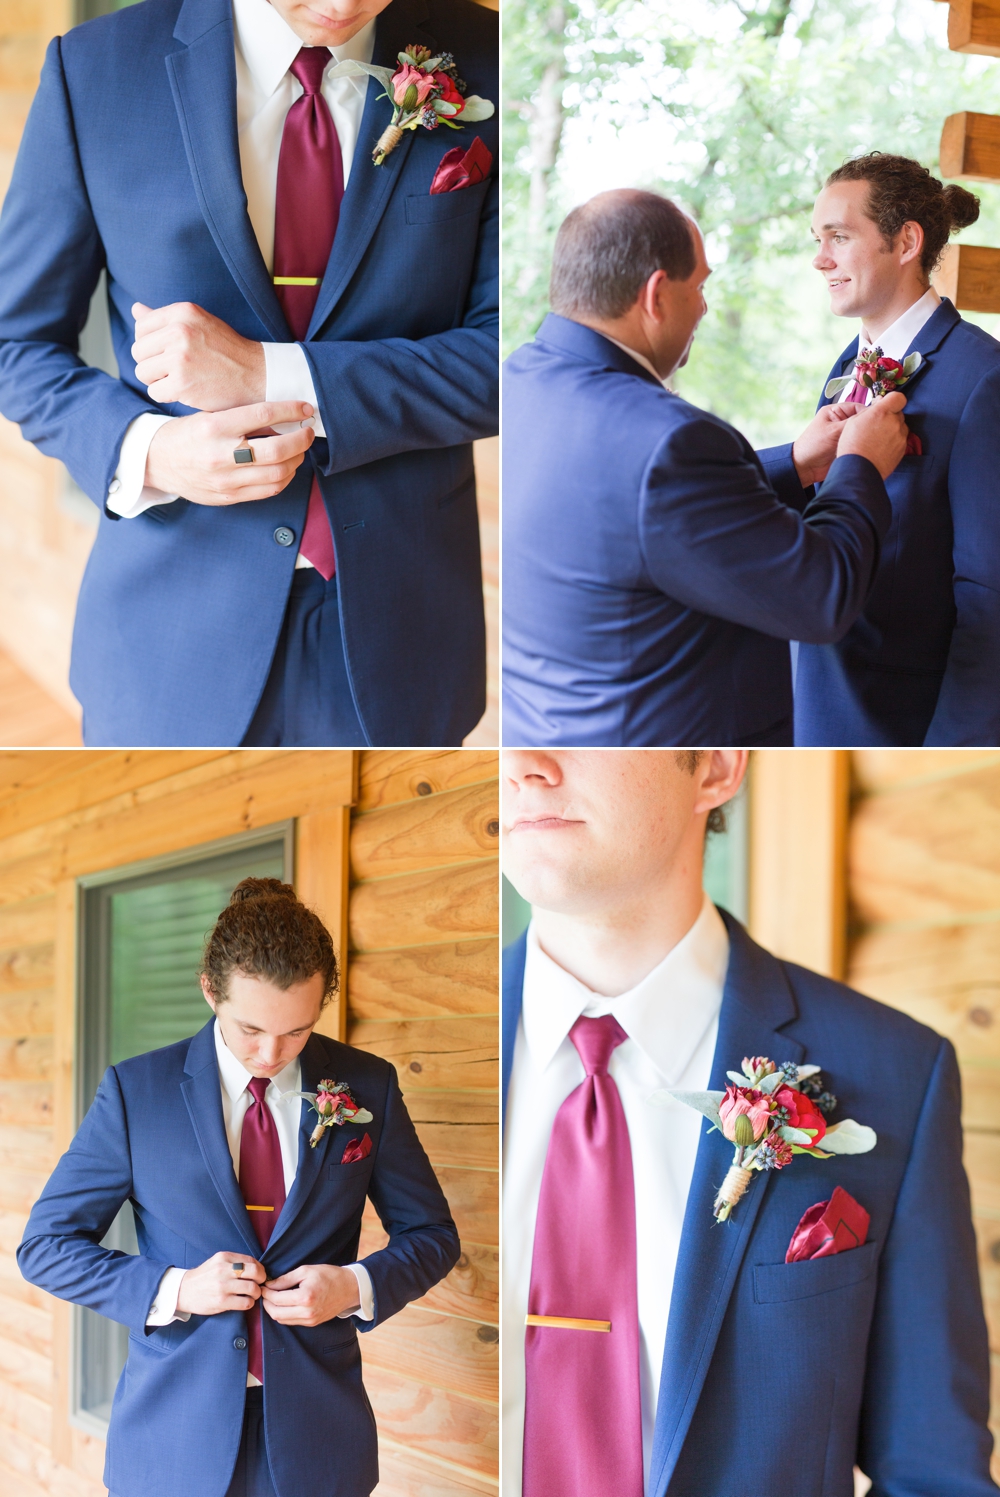 groom getting tie fixed on enchanted acre's groom suite porch